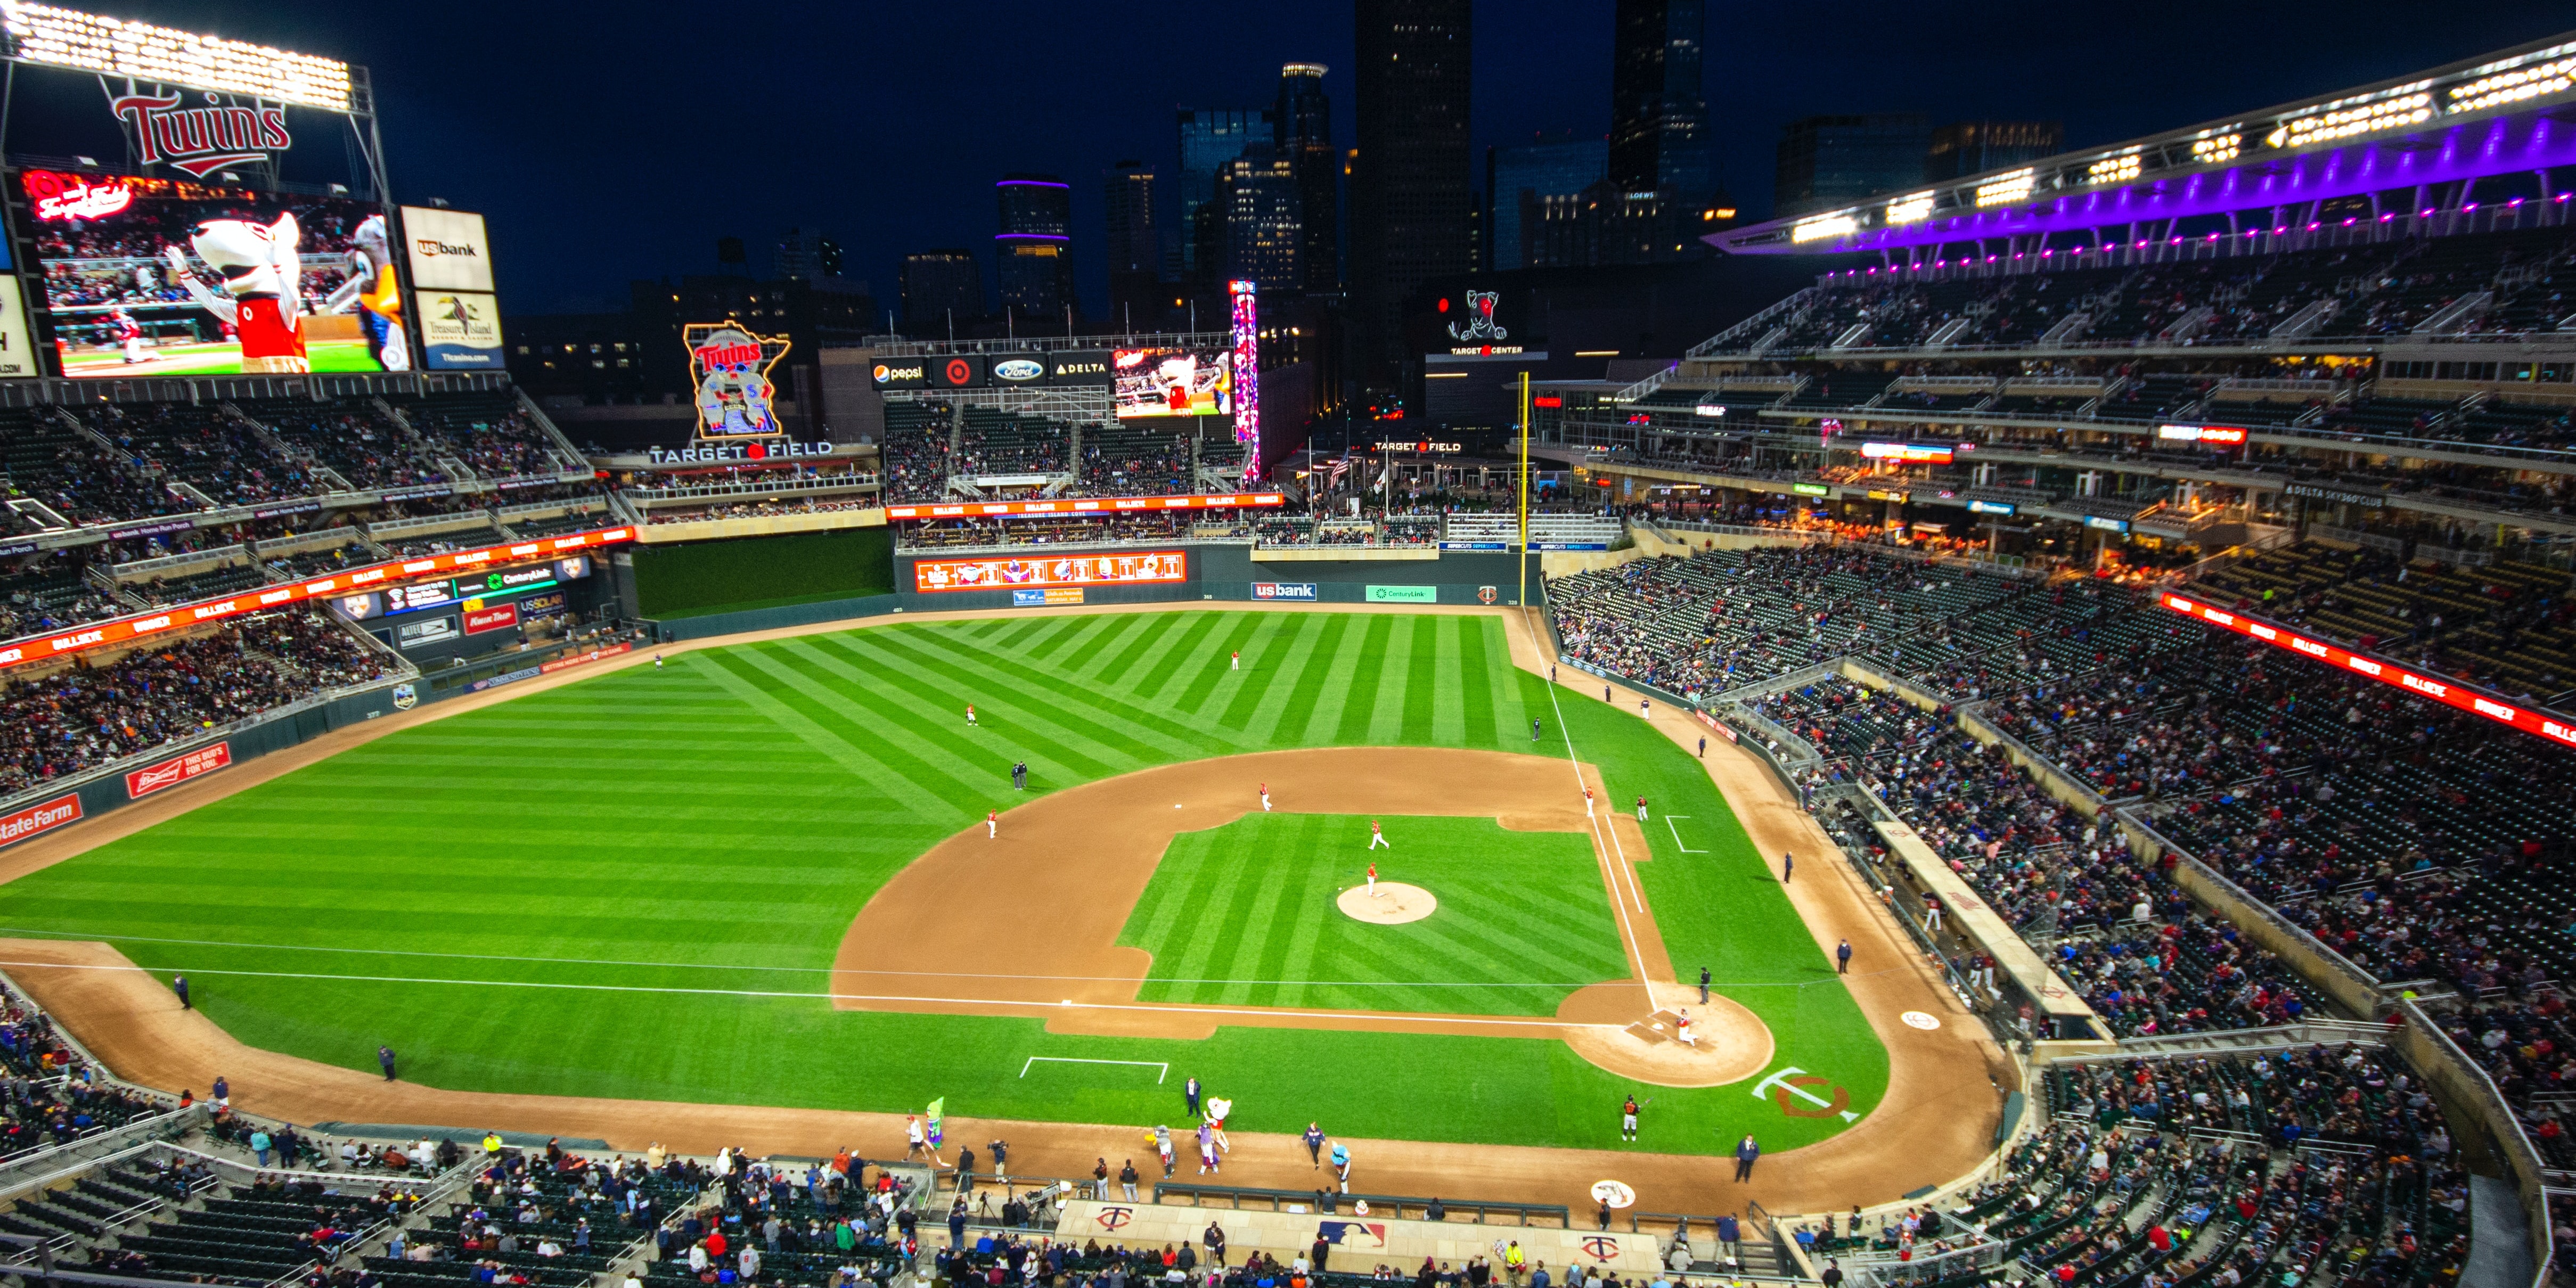 Target field bag policy guide everything you need to know